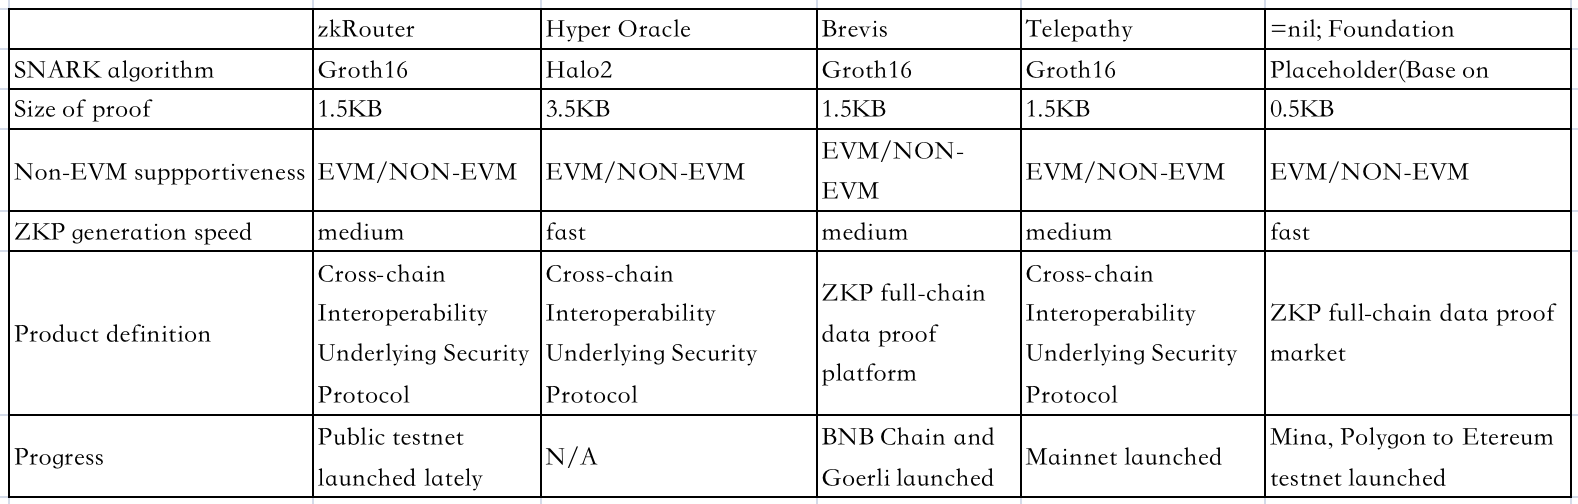 Table 2 Comparison of major cross-chain protocols based on ZKP